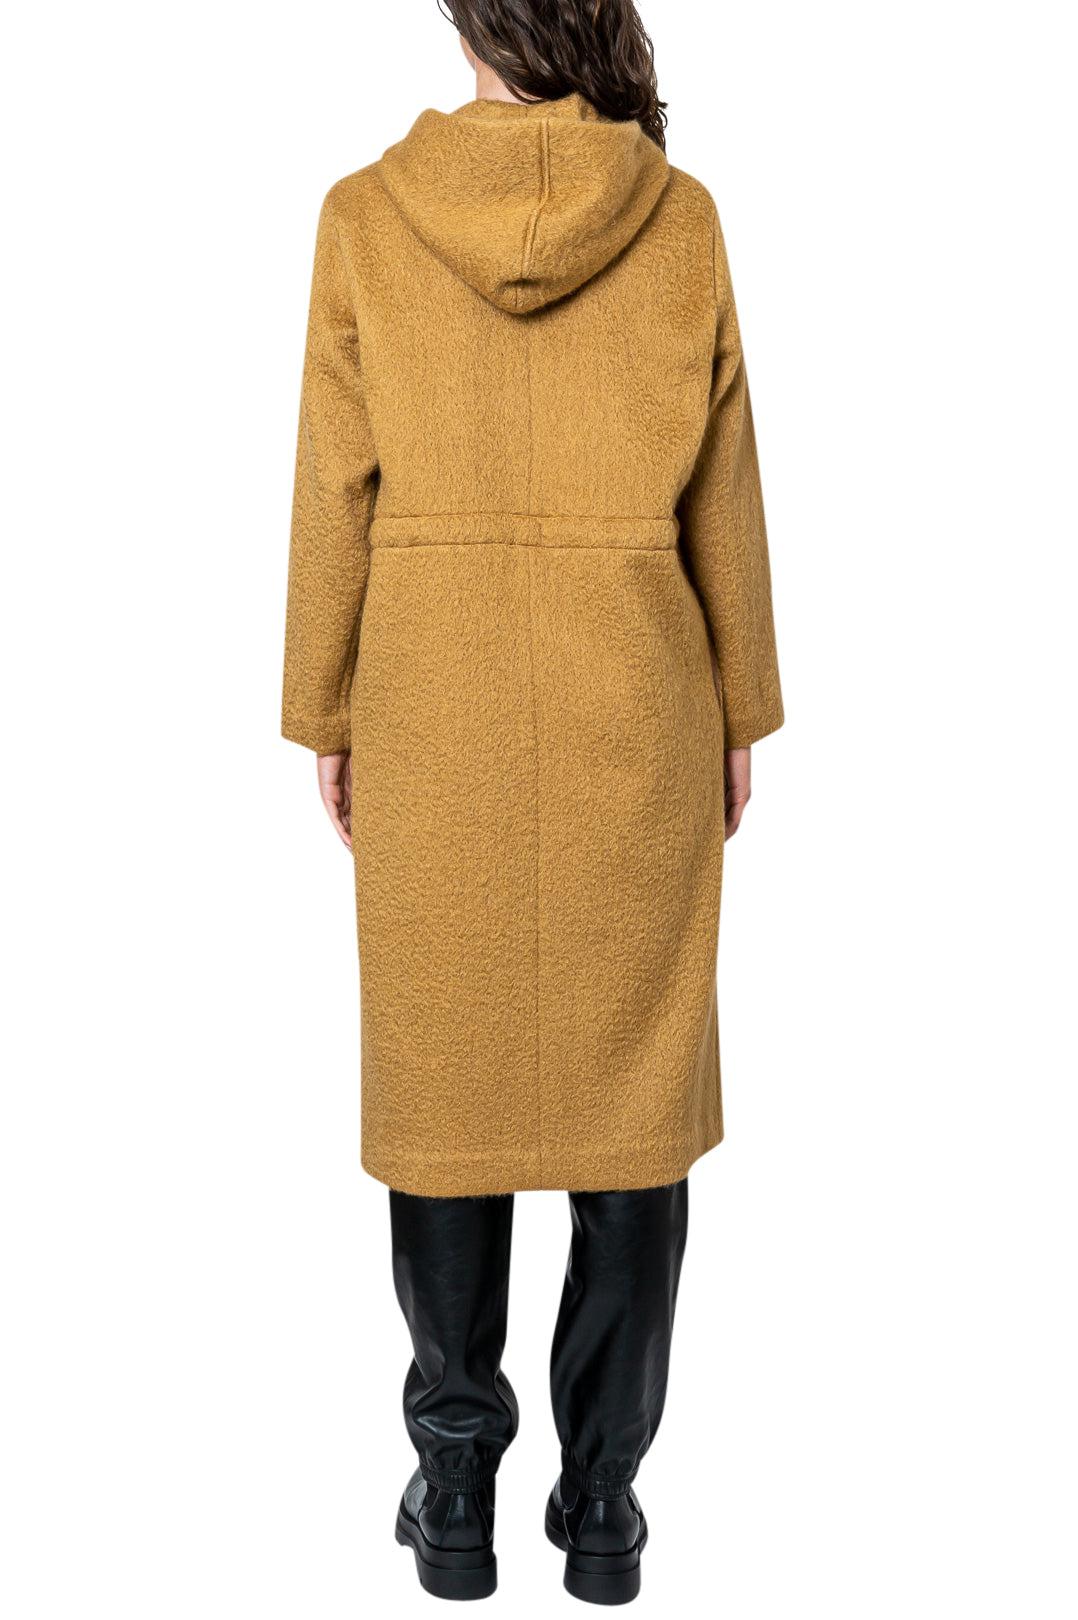 Missing You Already-Wool and mohair long coat-dgallerystore